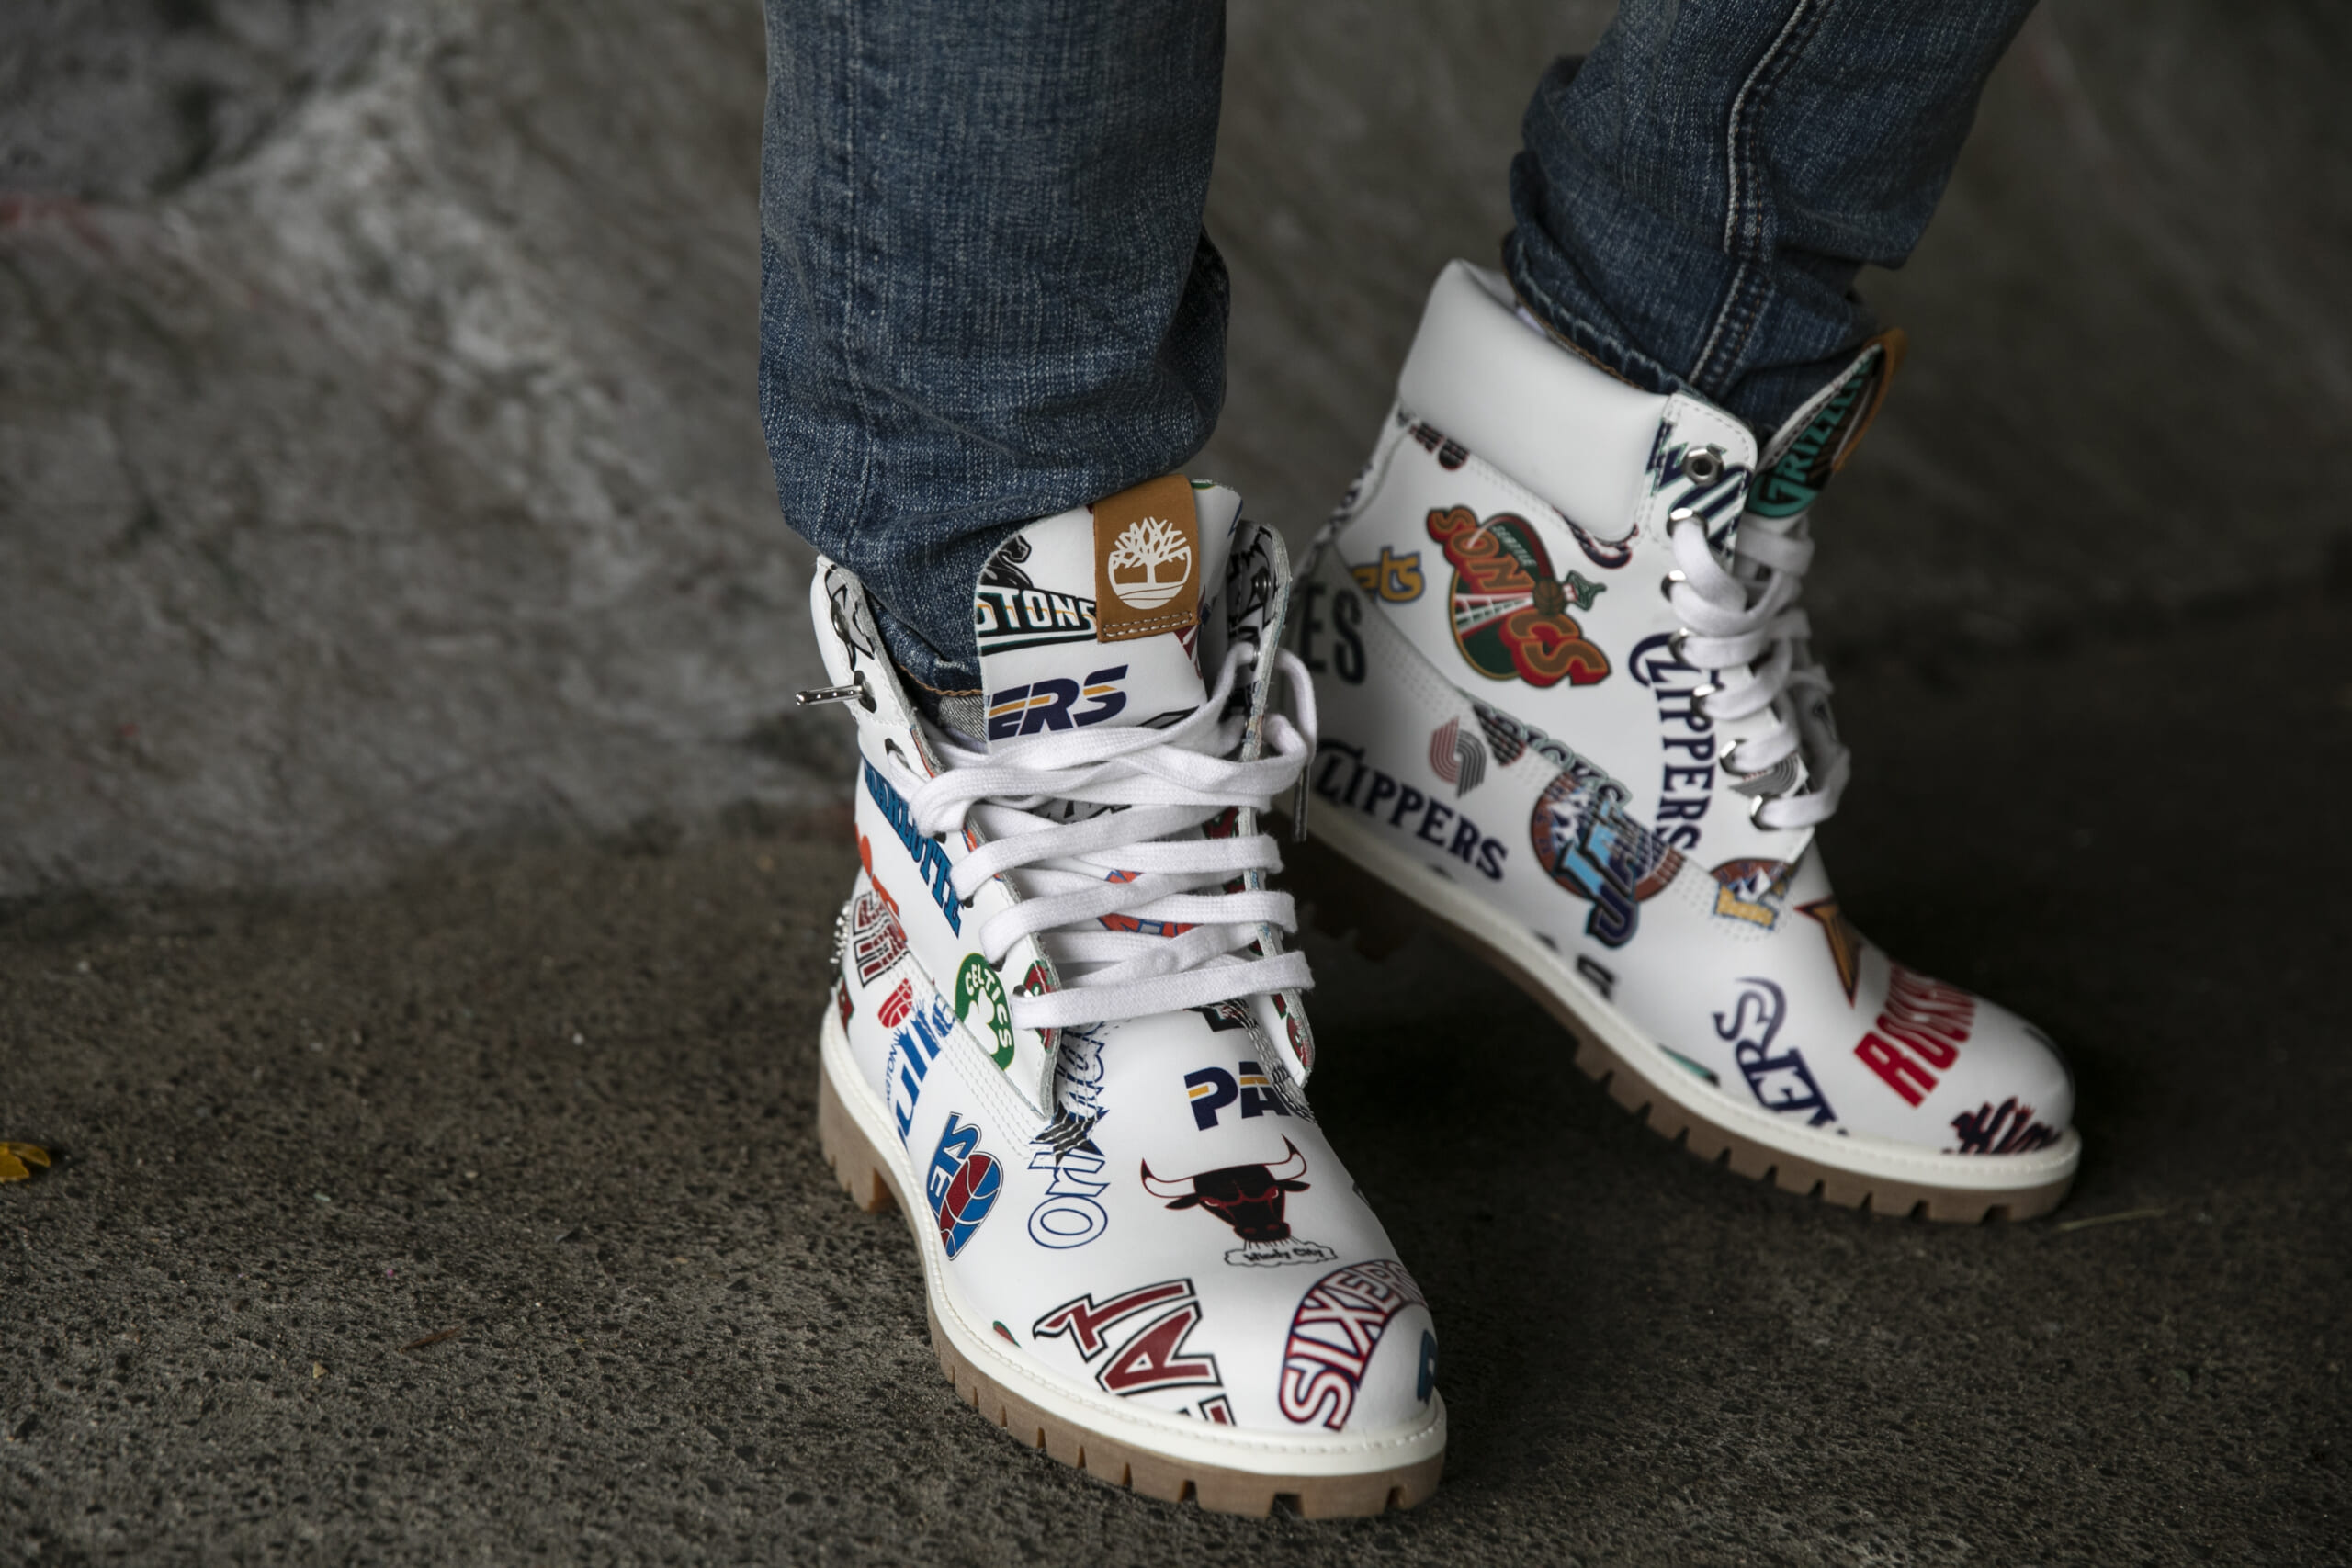 Worlds Collide as Mitchell & Ness, Timberland & the NBA Team Up